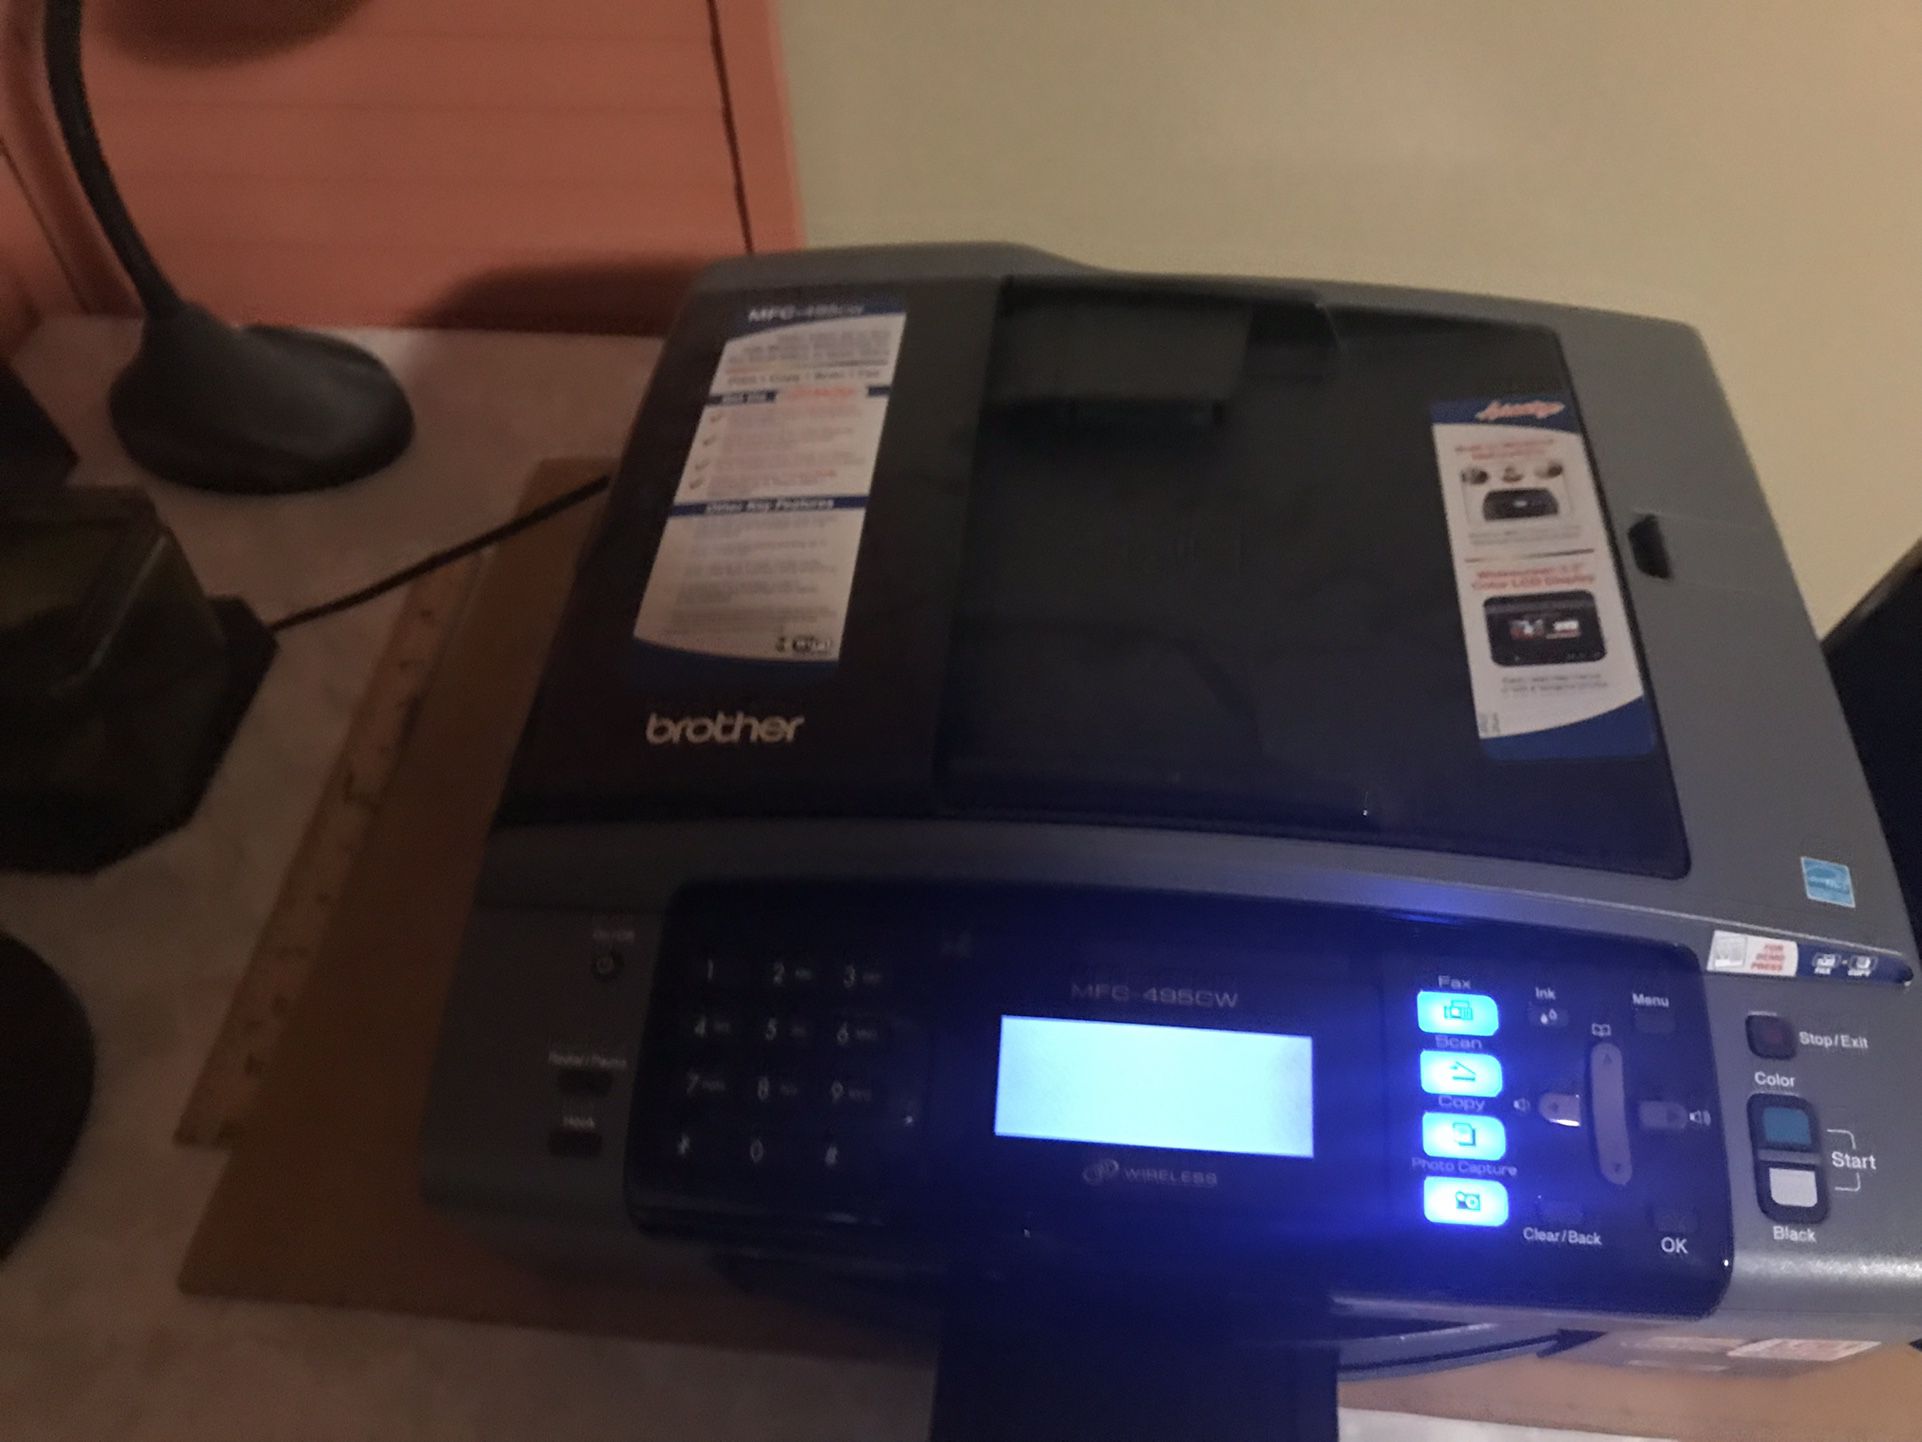 Brother MDC-495cw Printer/scanner/fax